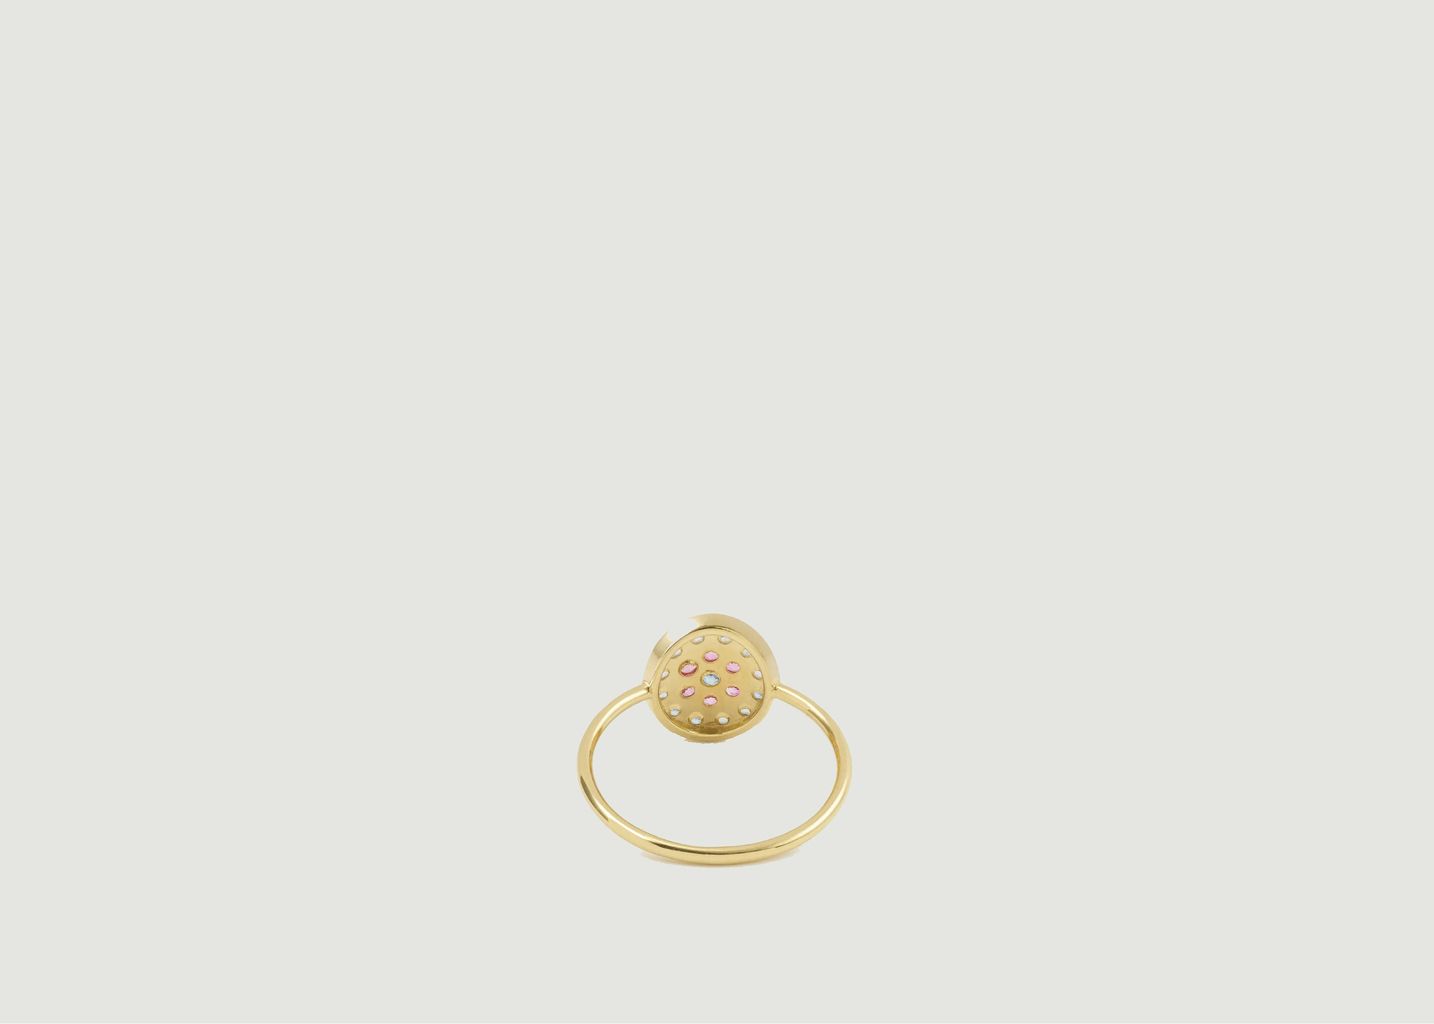 Babystone 1 Rose ring - Sophie d'Agon